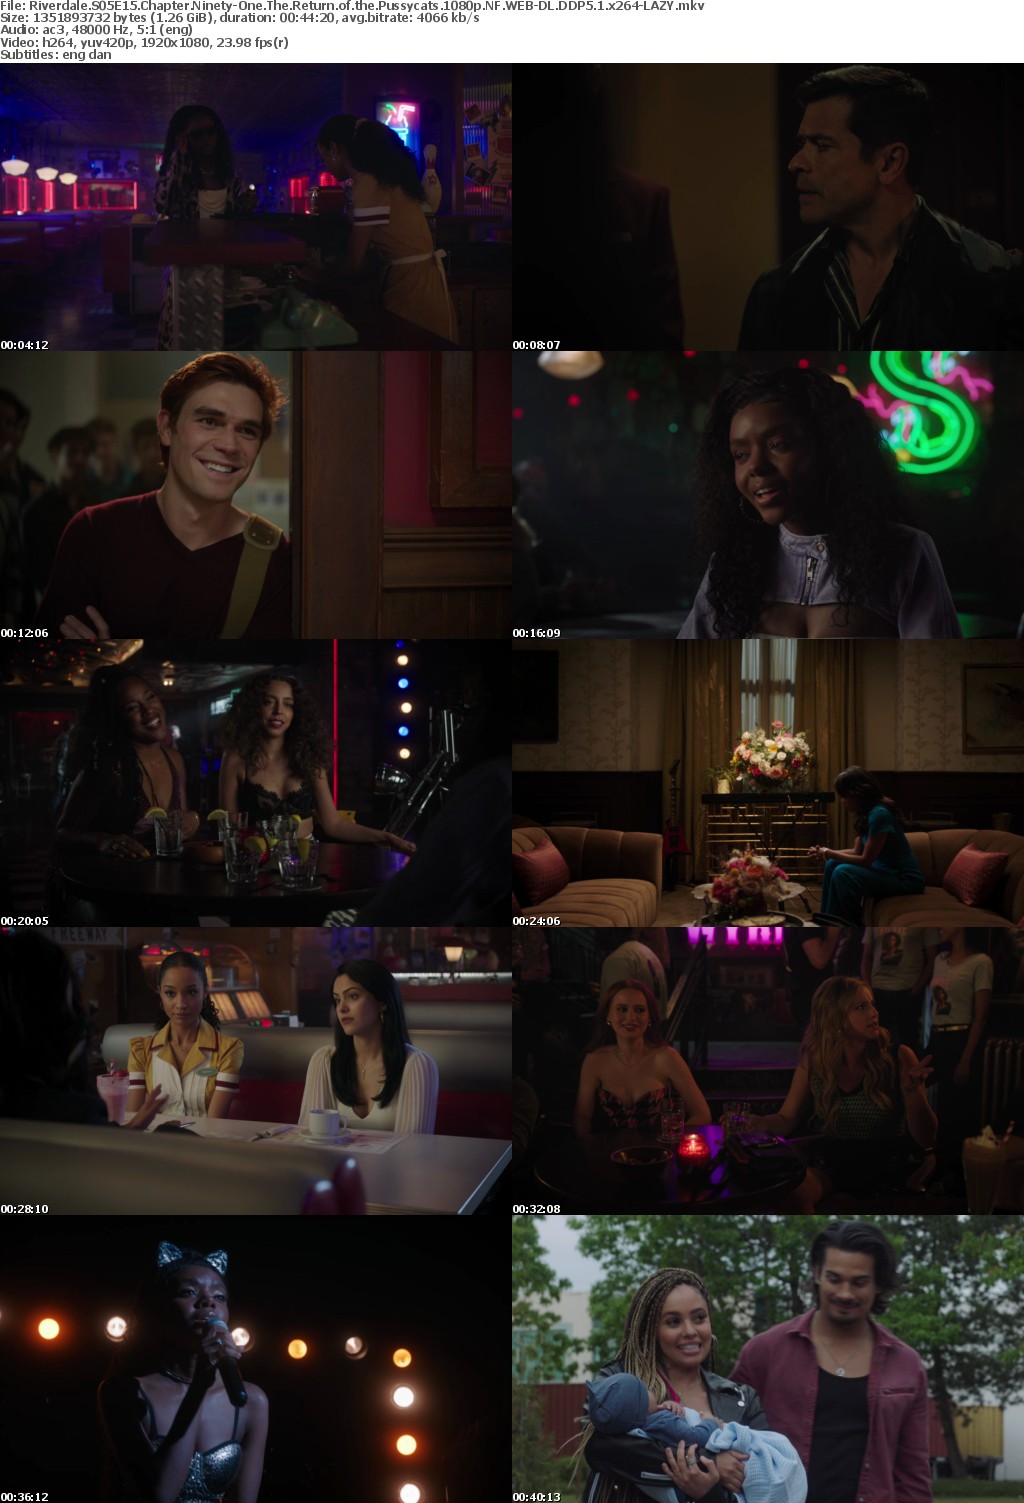 Riverdale US S05E15 Chapter Ninety-One The Return of the Pussycats 1080p NF WEBRip DDP5 1 x264-LAZY